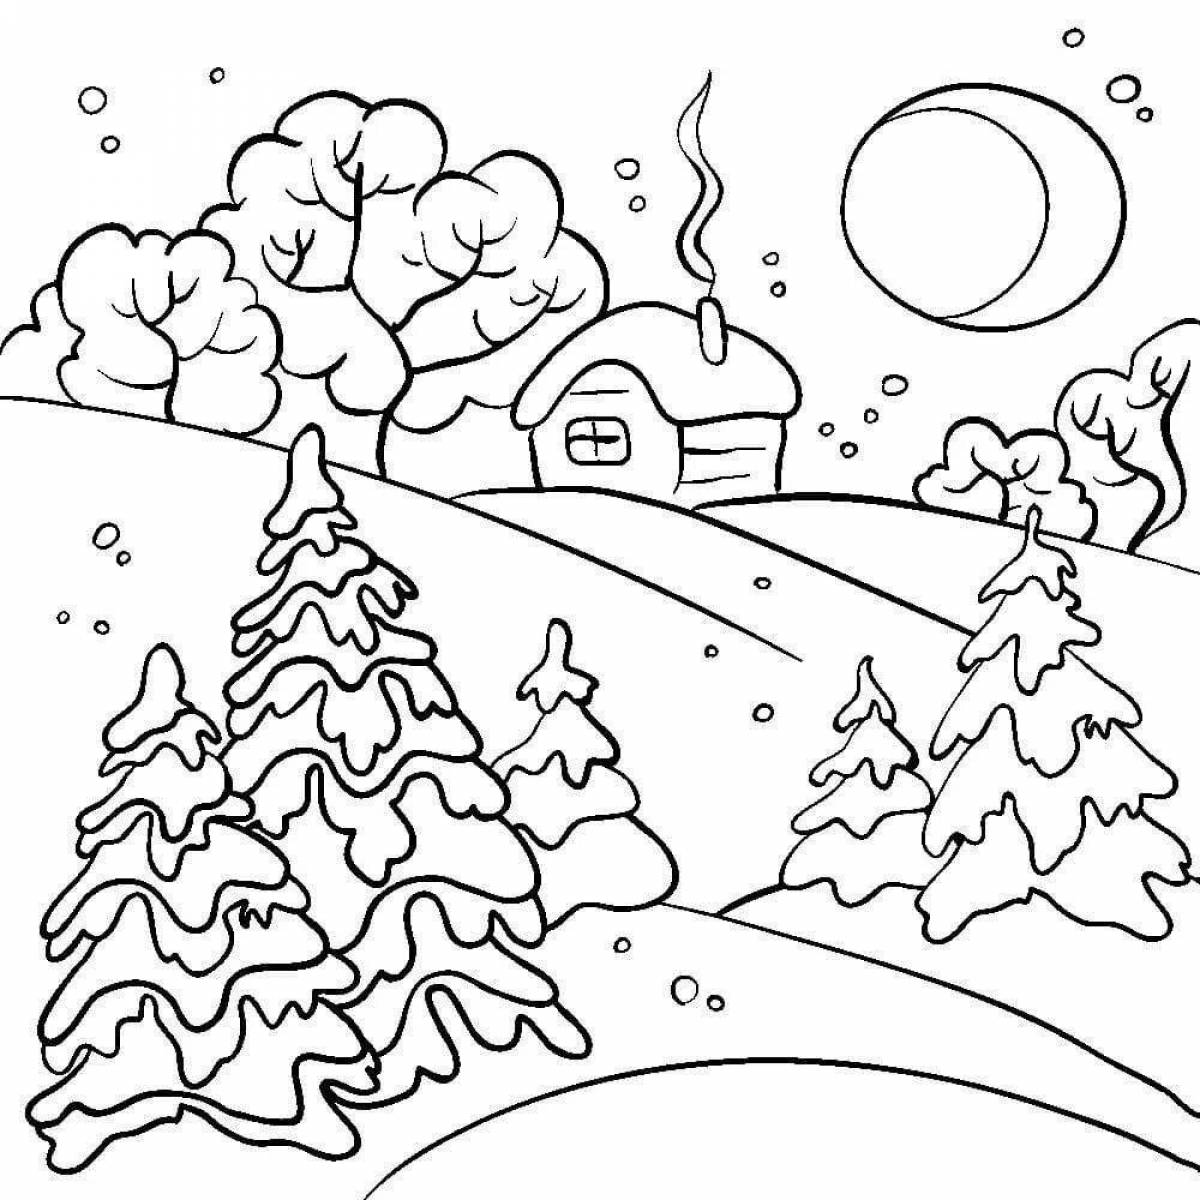 Inspirational winter forest coloring book for 4-5 year olds